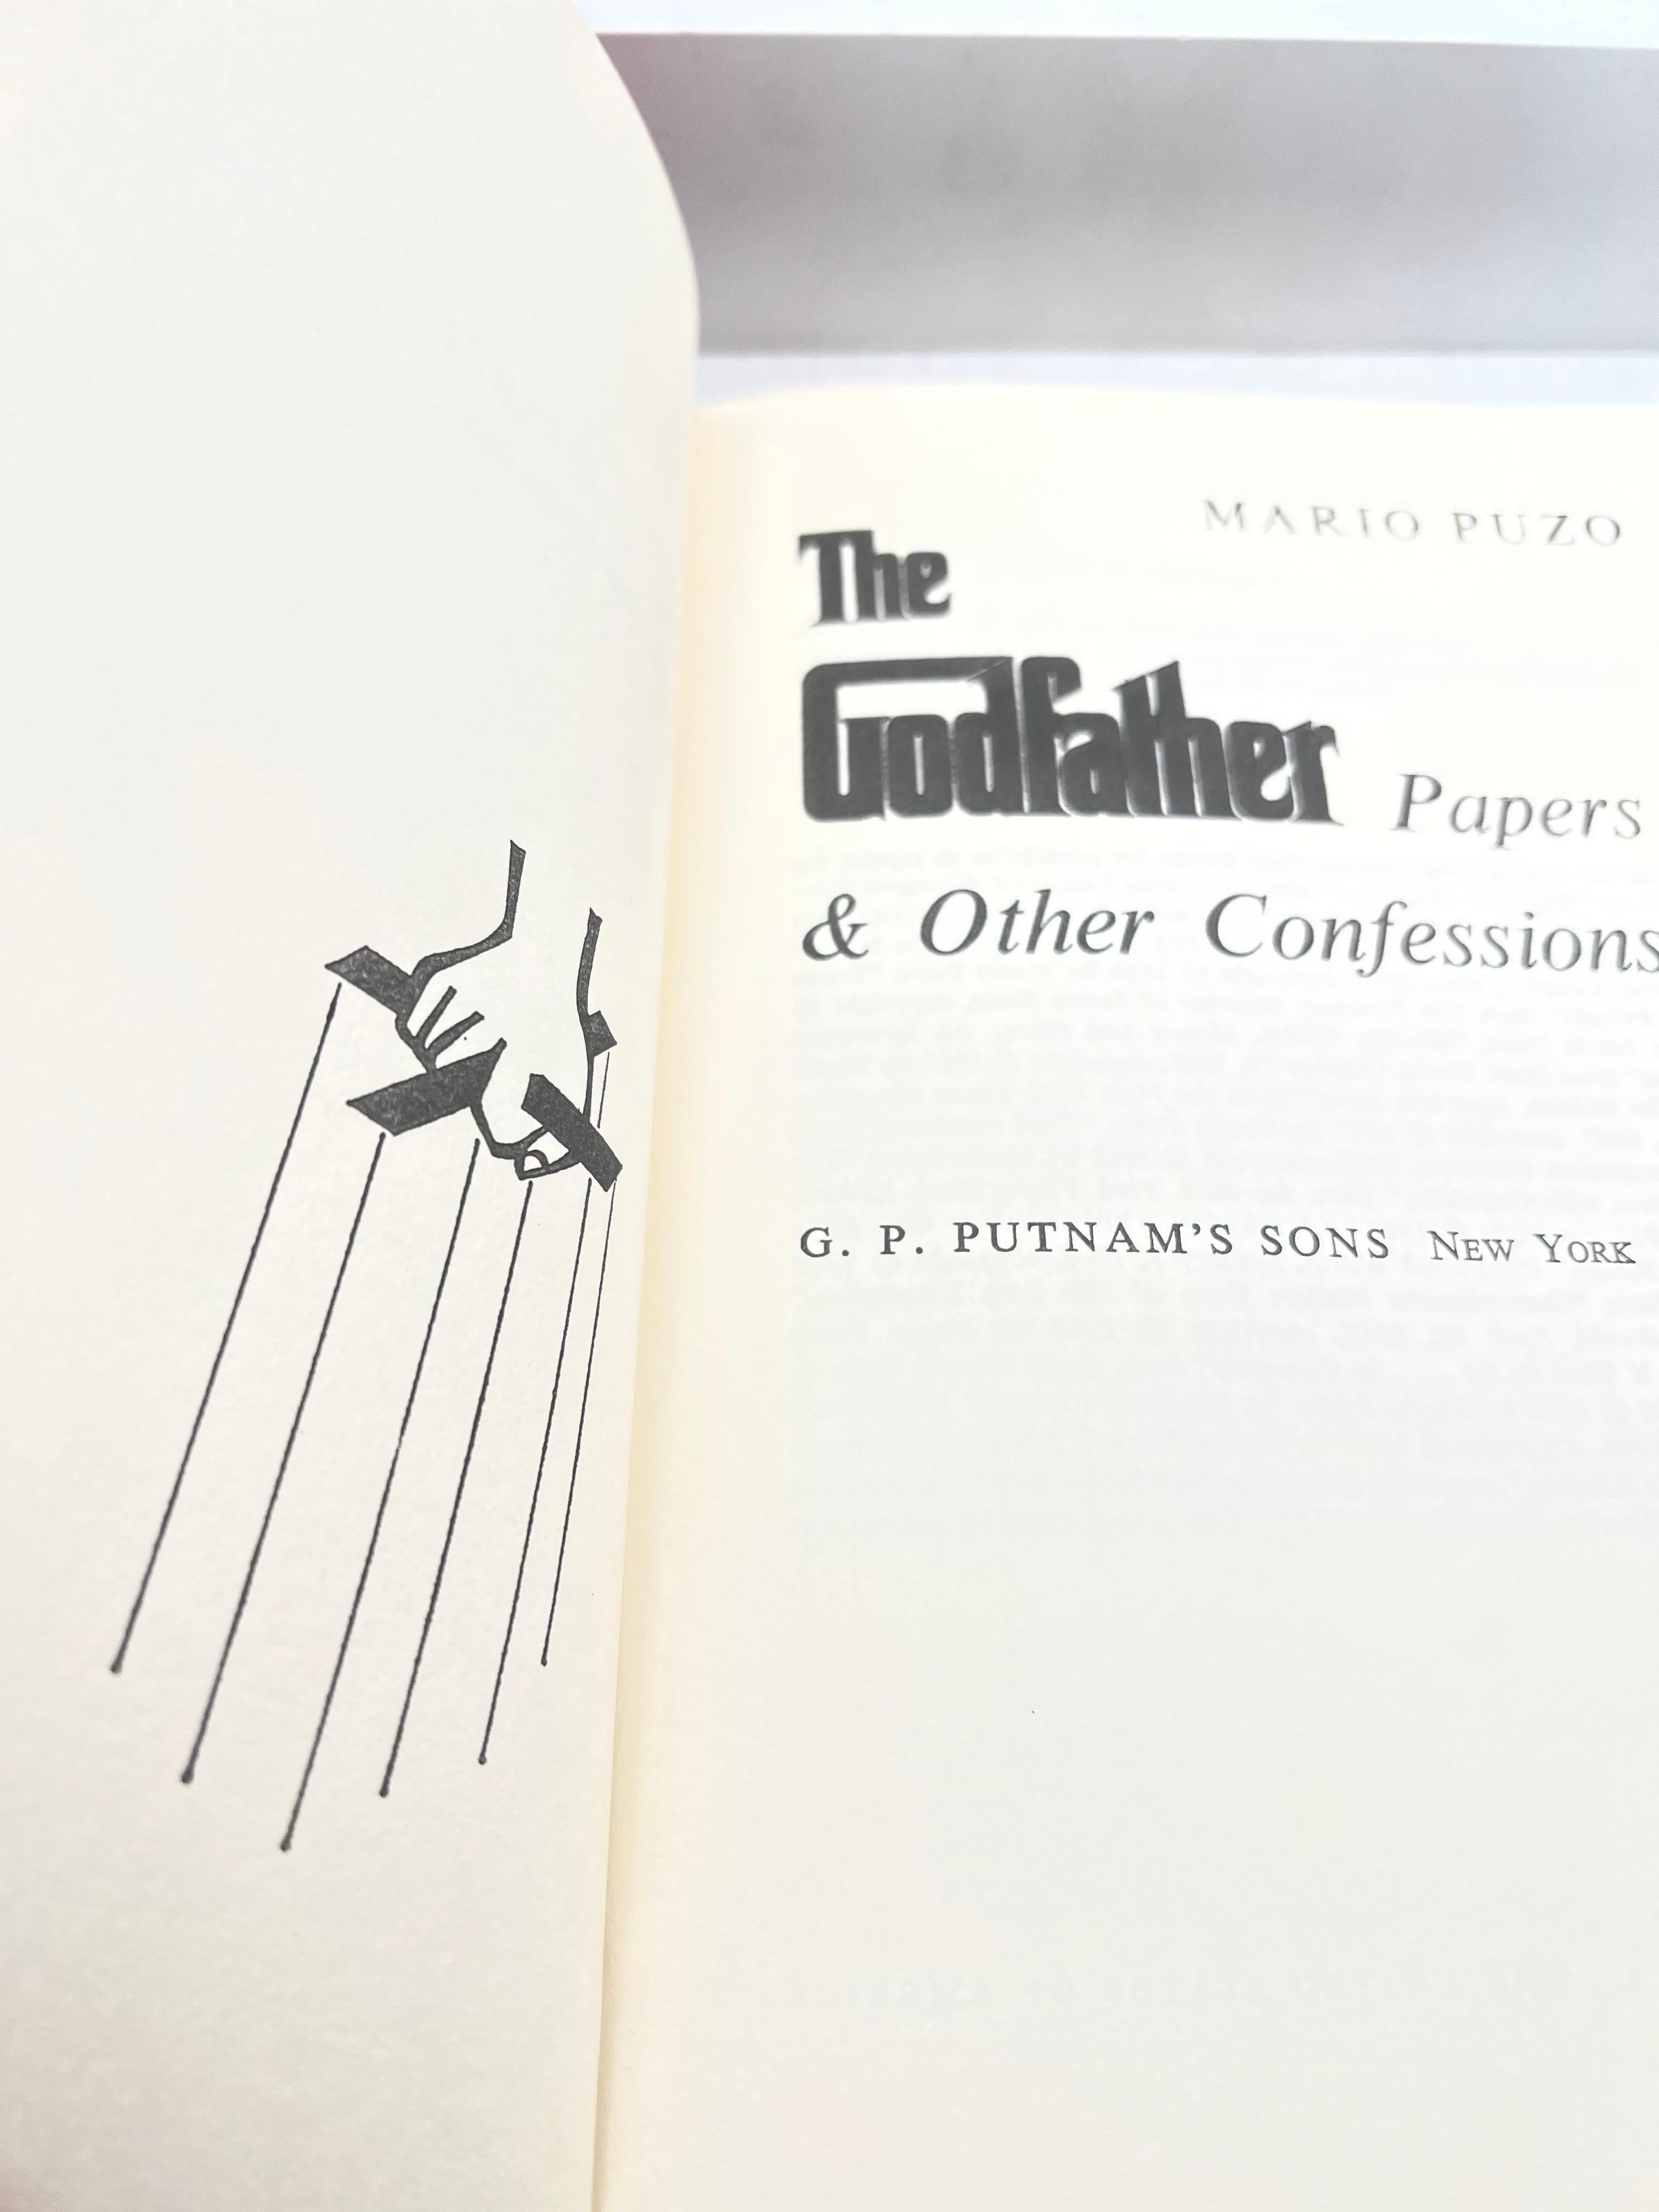 20th Century Classic The Godfather Papers Hardcover 1972 Book by Mario Puzzo